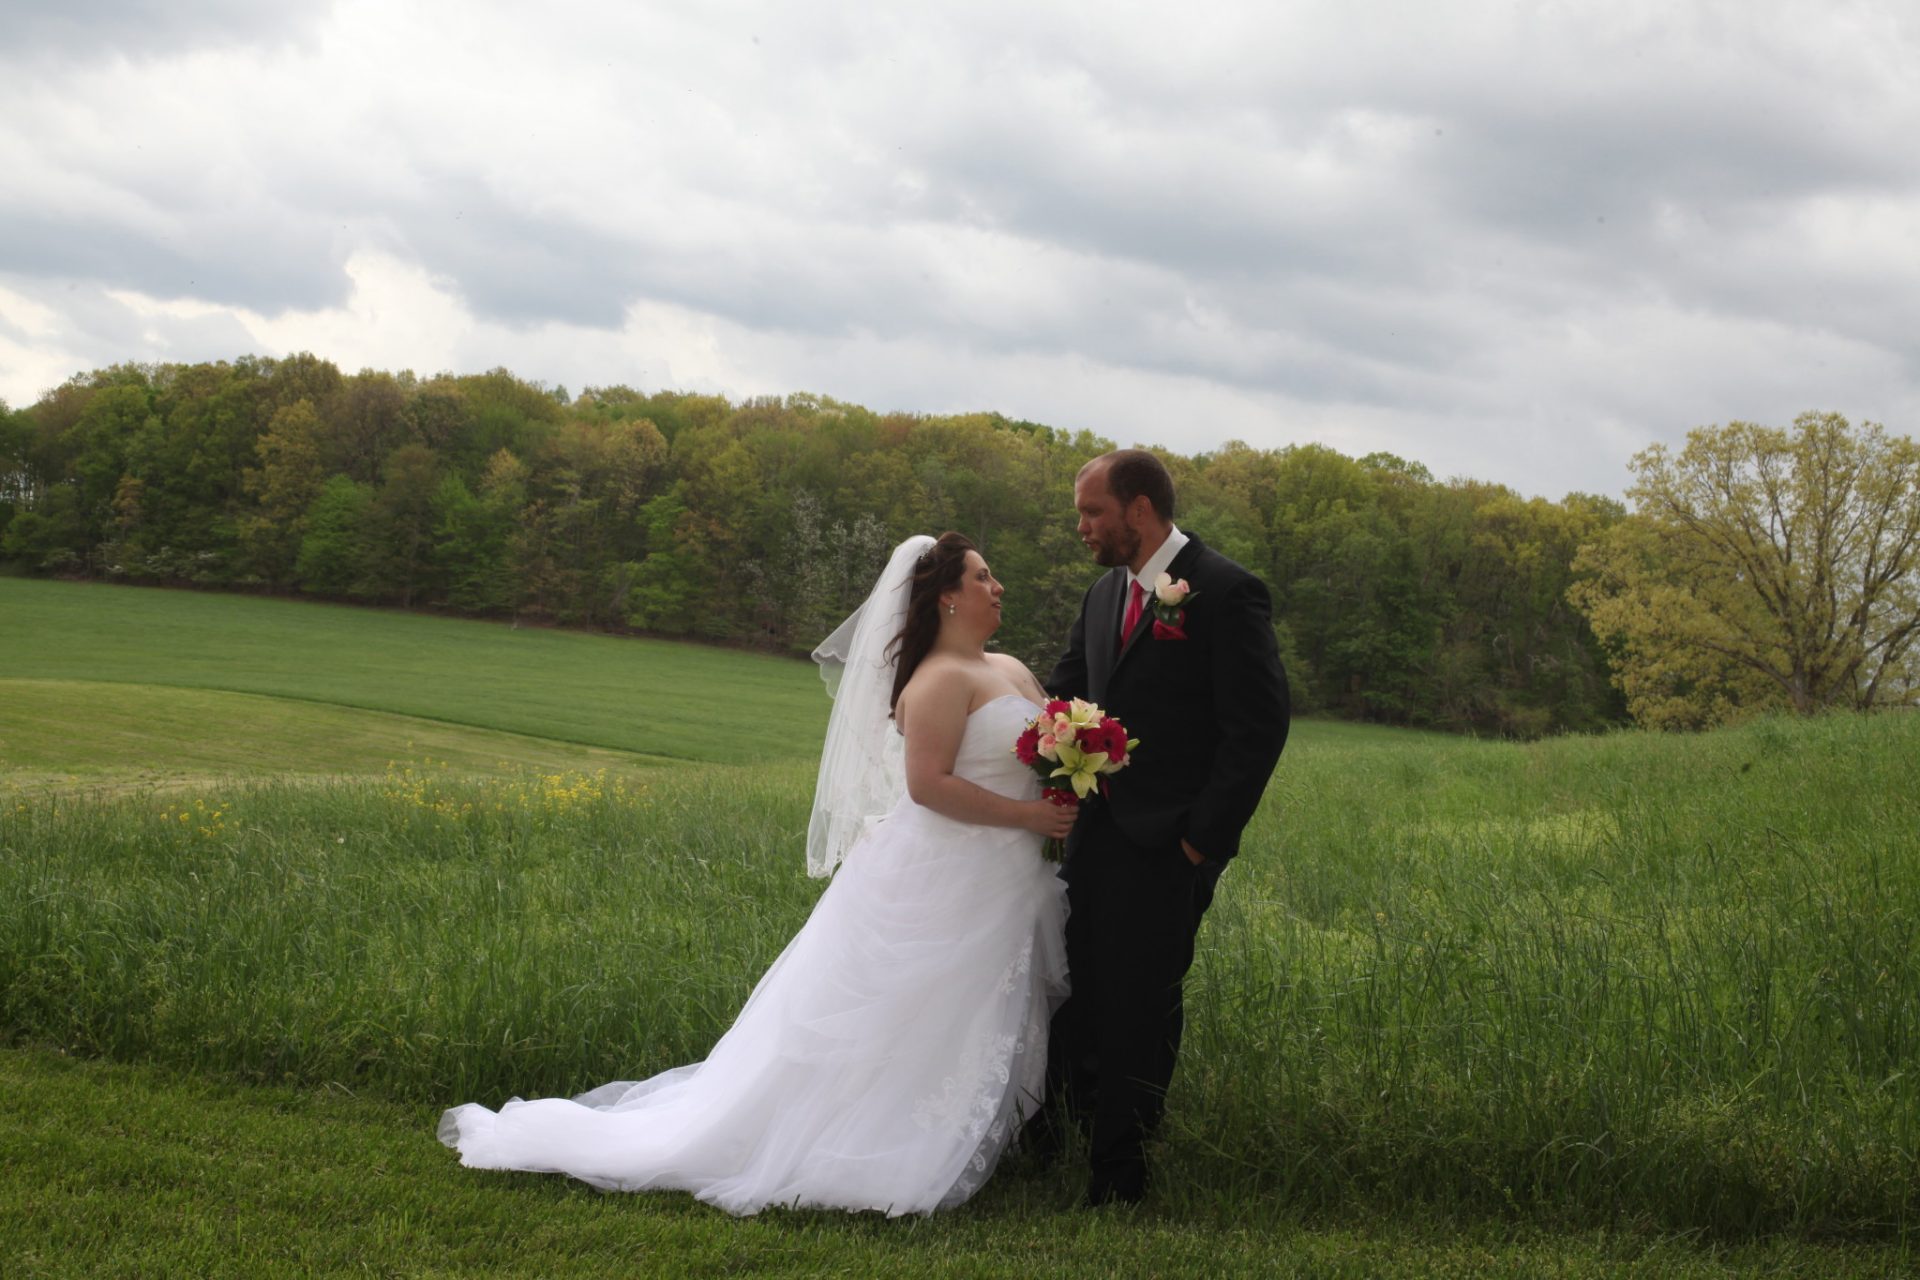 Outside wedding at Morningside Inn, bride and groom pose with rolling hills as backdrop